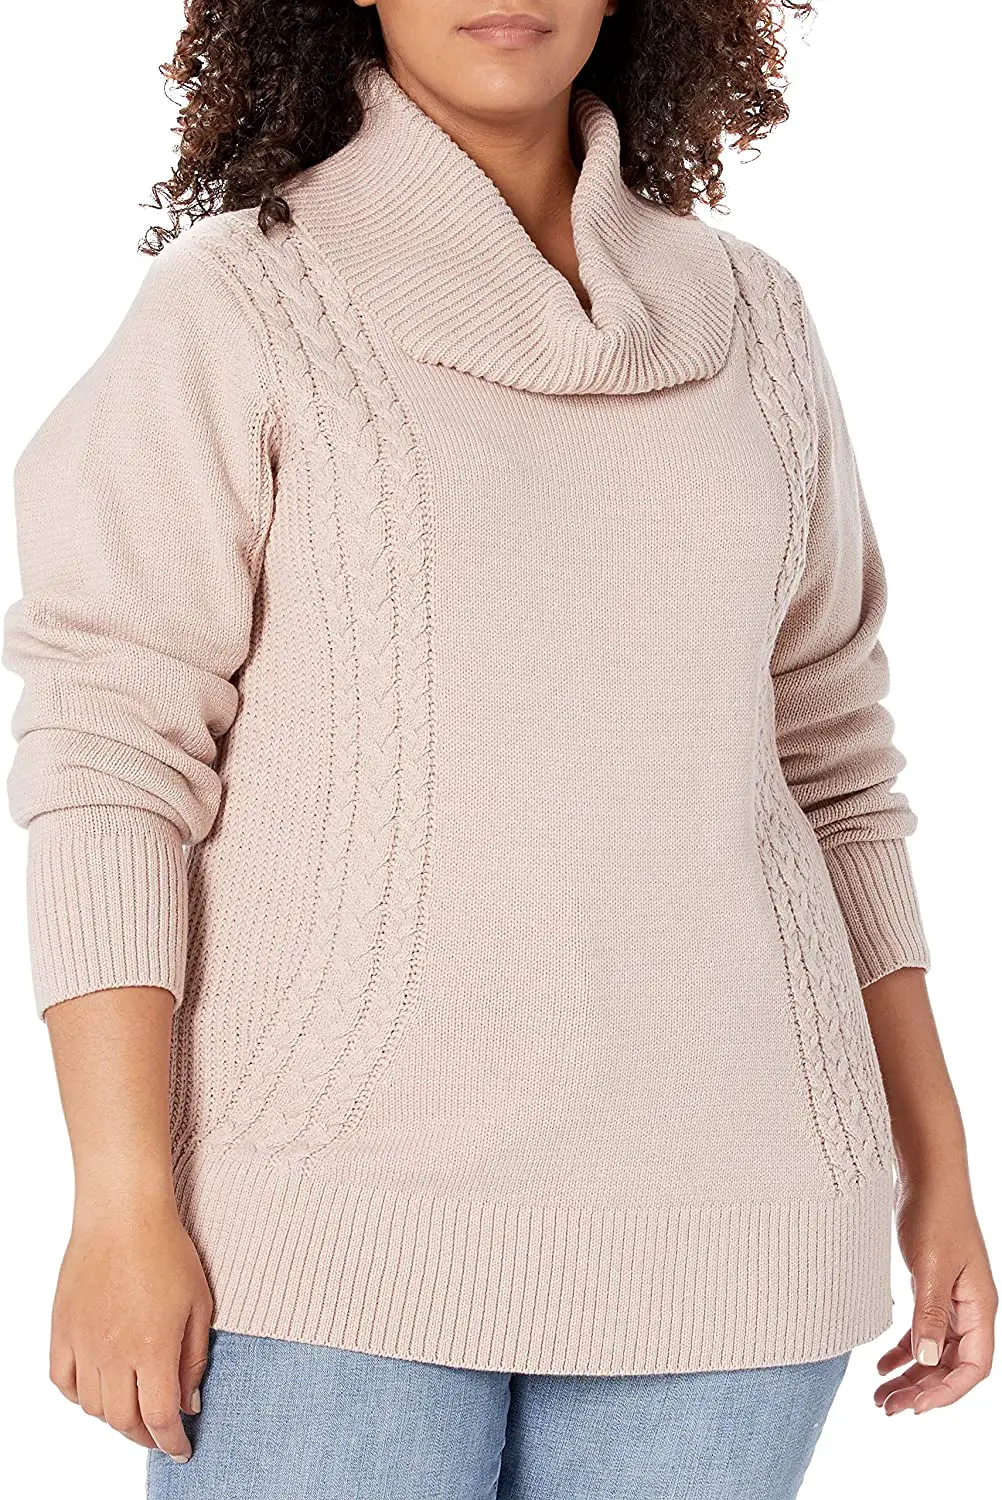 Plus Size Cable Knit Sweater 01